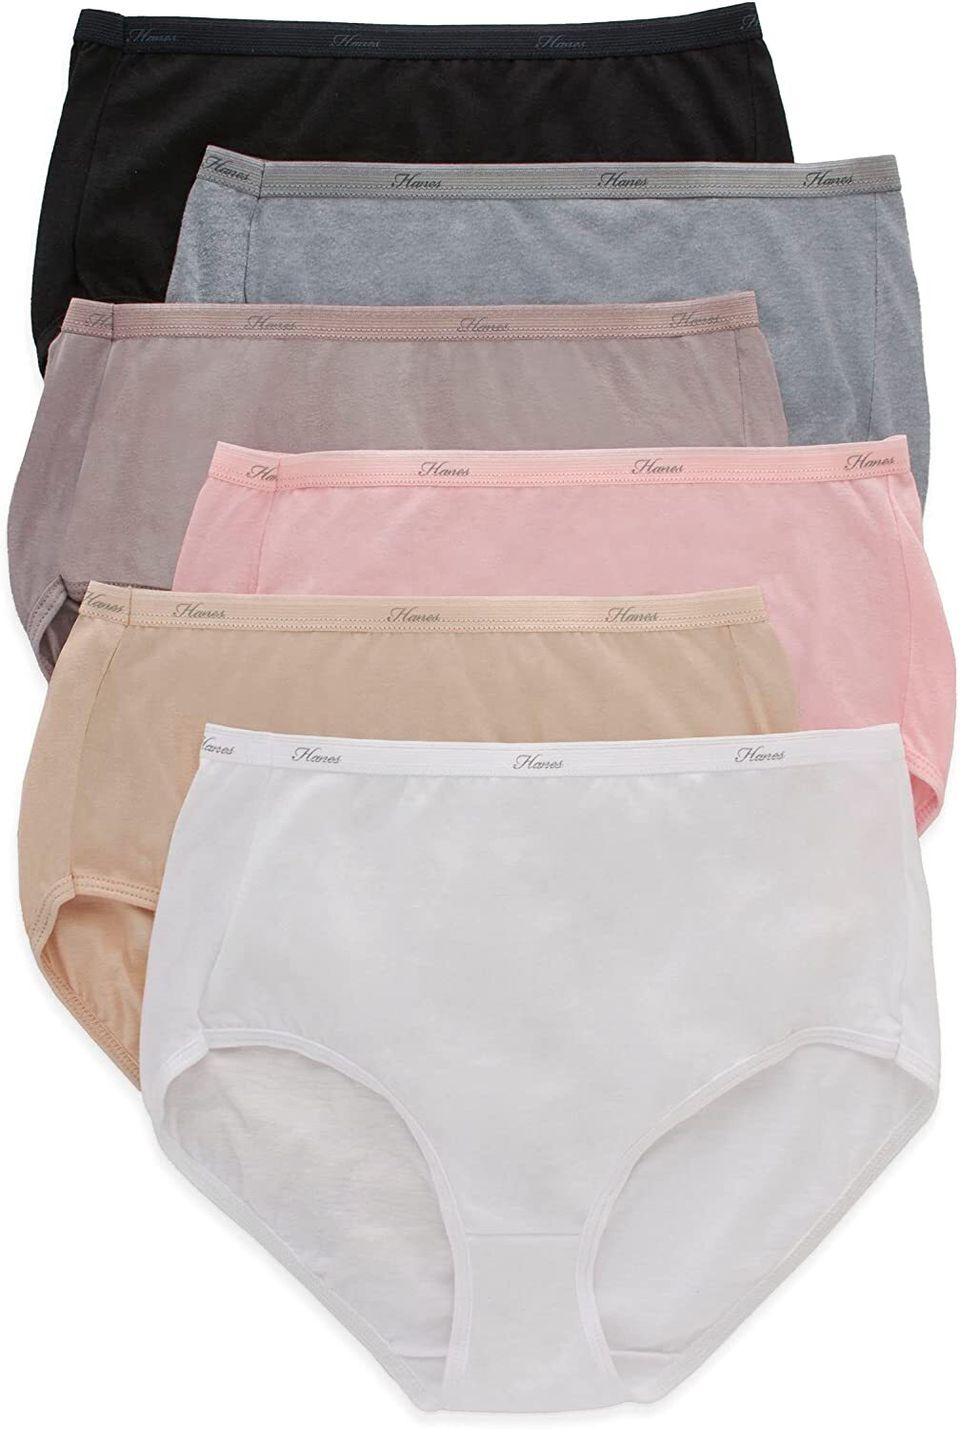 A six-pack of Hanes cotton briefs